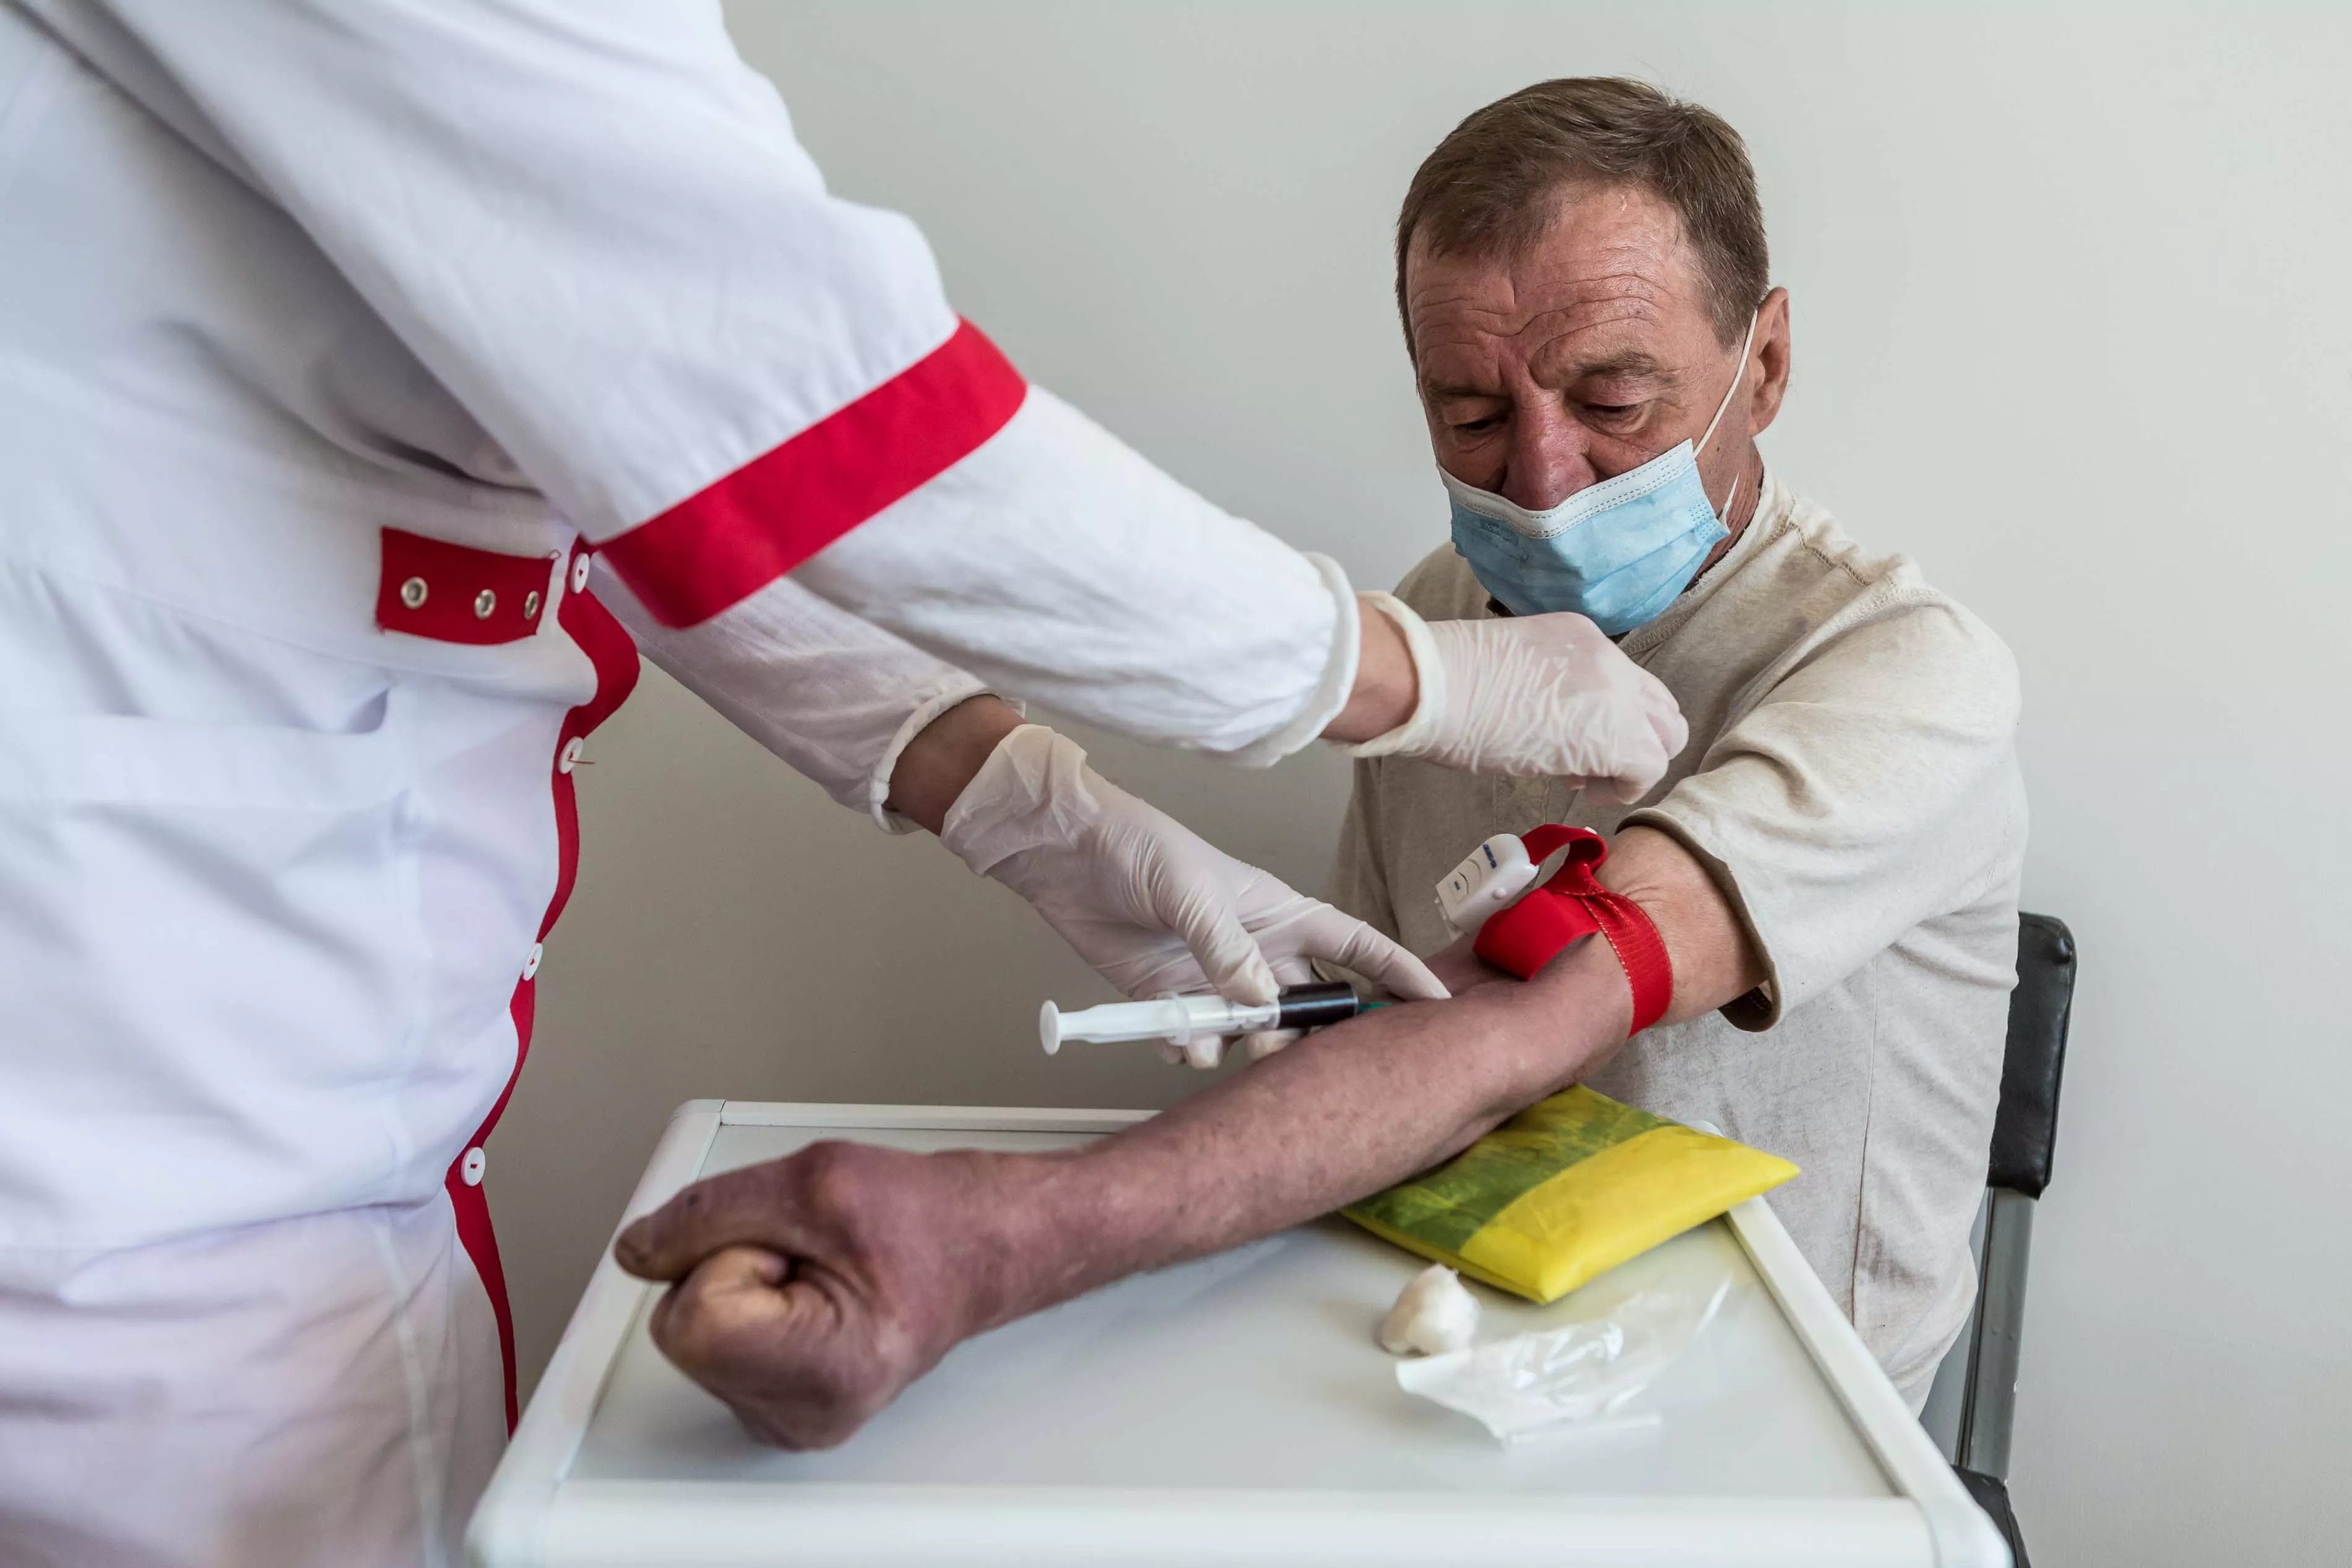 A nurse conducts a blood test on a DR-TB patient Dmitri Karpuk (name changed), 61 at the TB facility in Novograd-Volynsk district, Zhytomyr region, Ukraine.